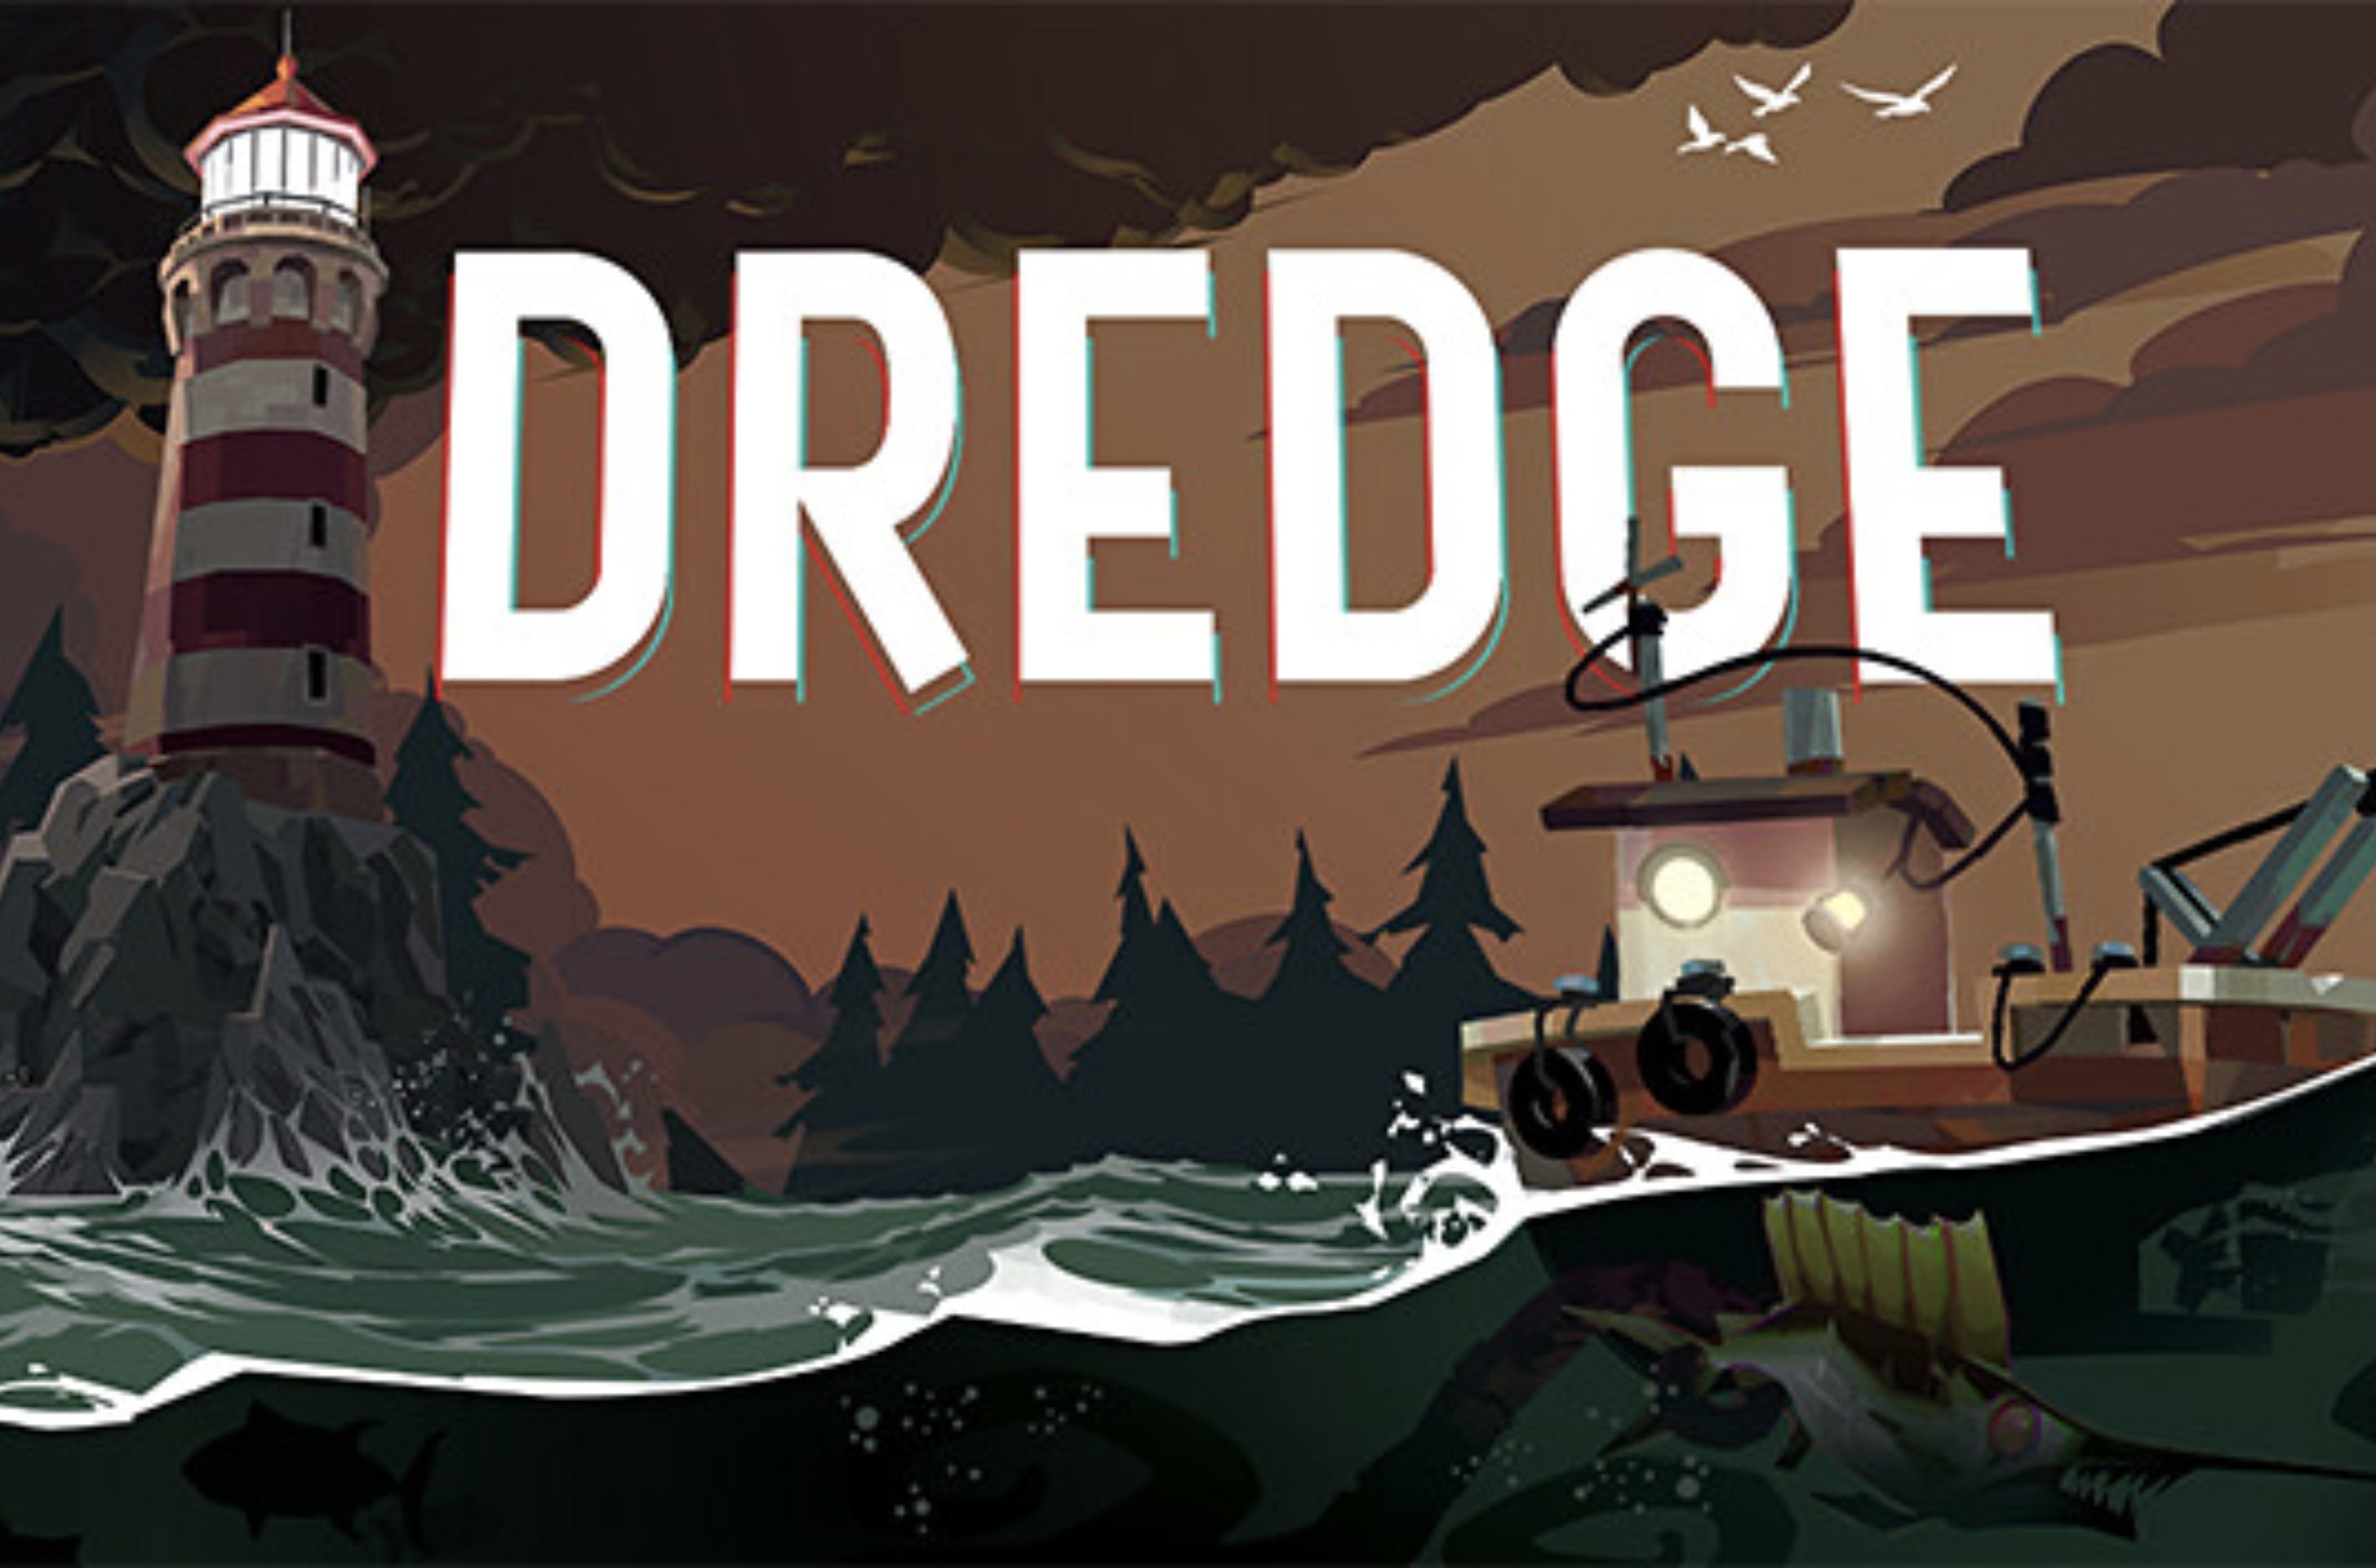 Image of Steam Dredge's steam-powered dredge, an underwater vessel designed for exploration and excavation in a steampunk world.